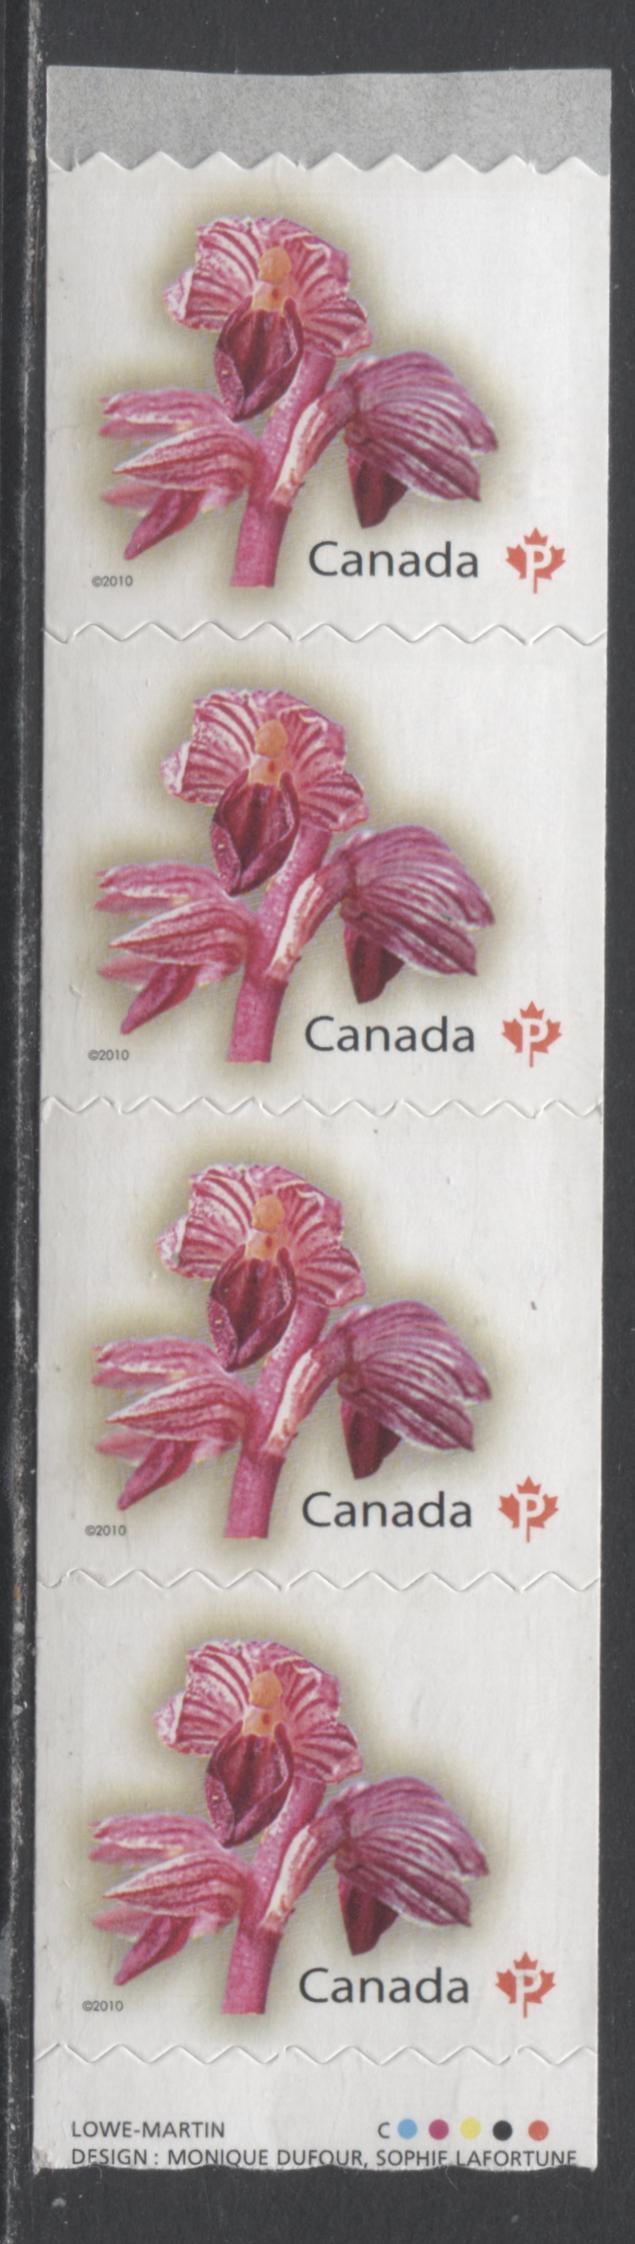 Lot 120 Canada #2357i P(57c) Multicolored Striped Coralroot, 2010 Flower Definitive Coils, A VFNH End Strip Of 5